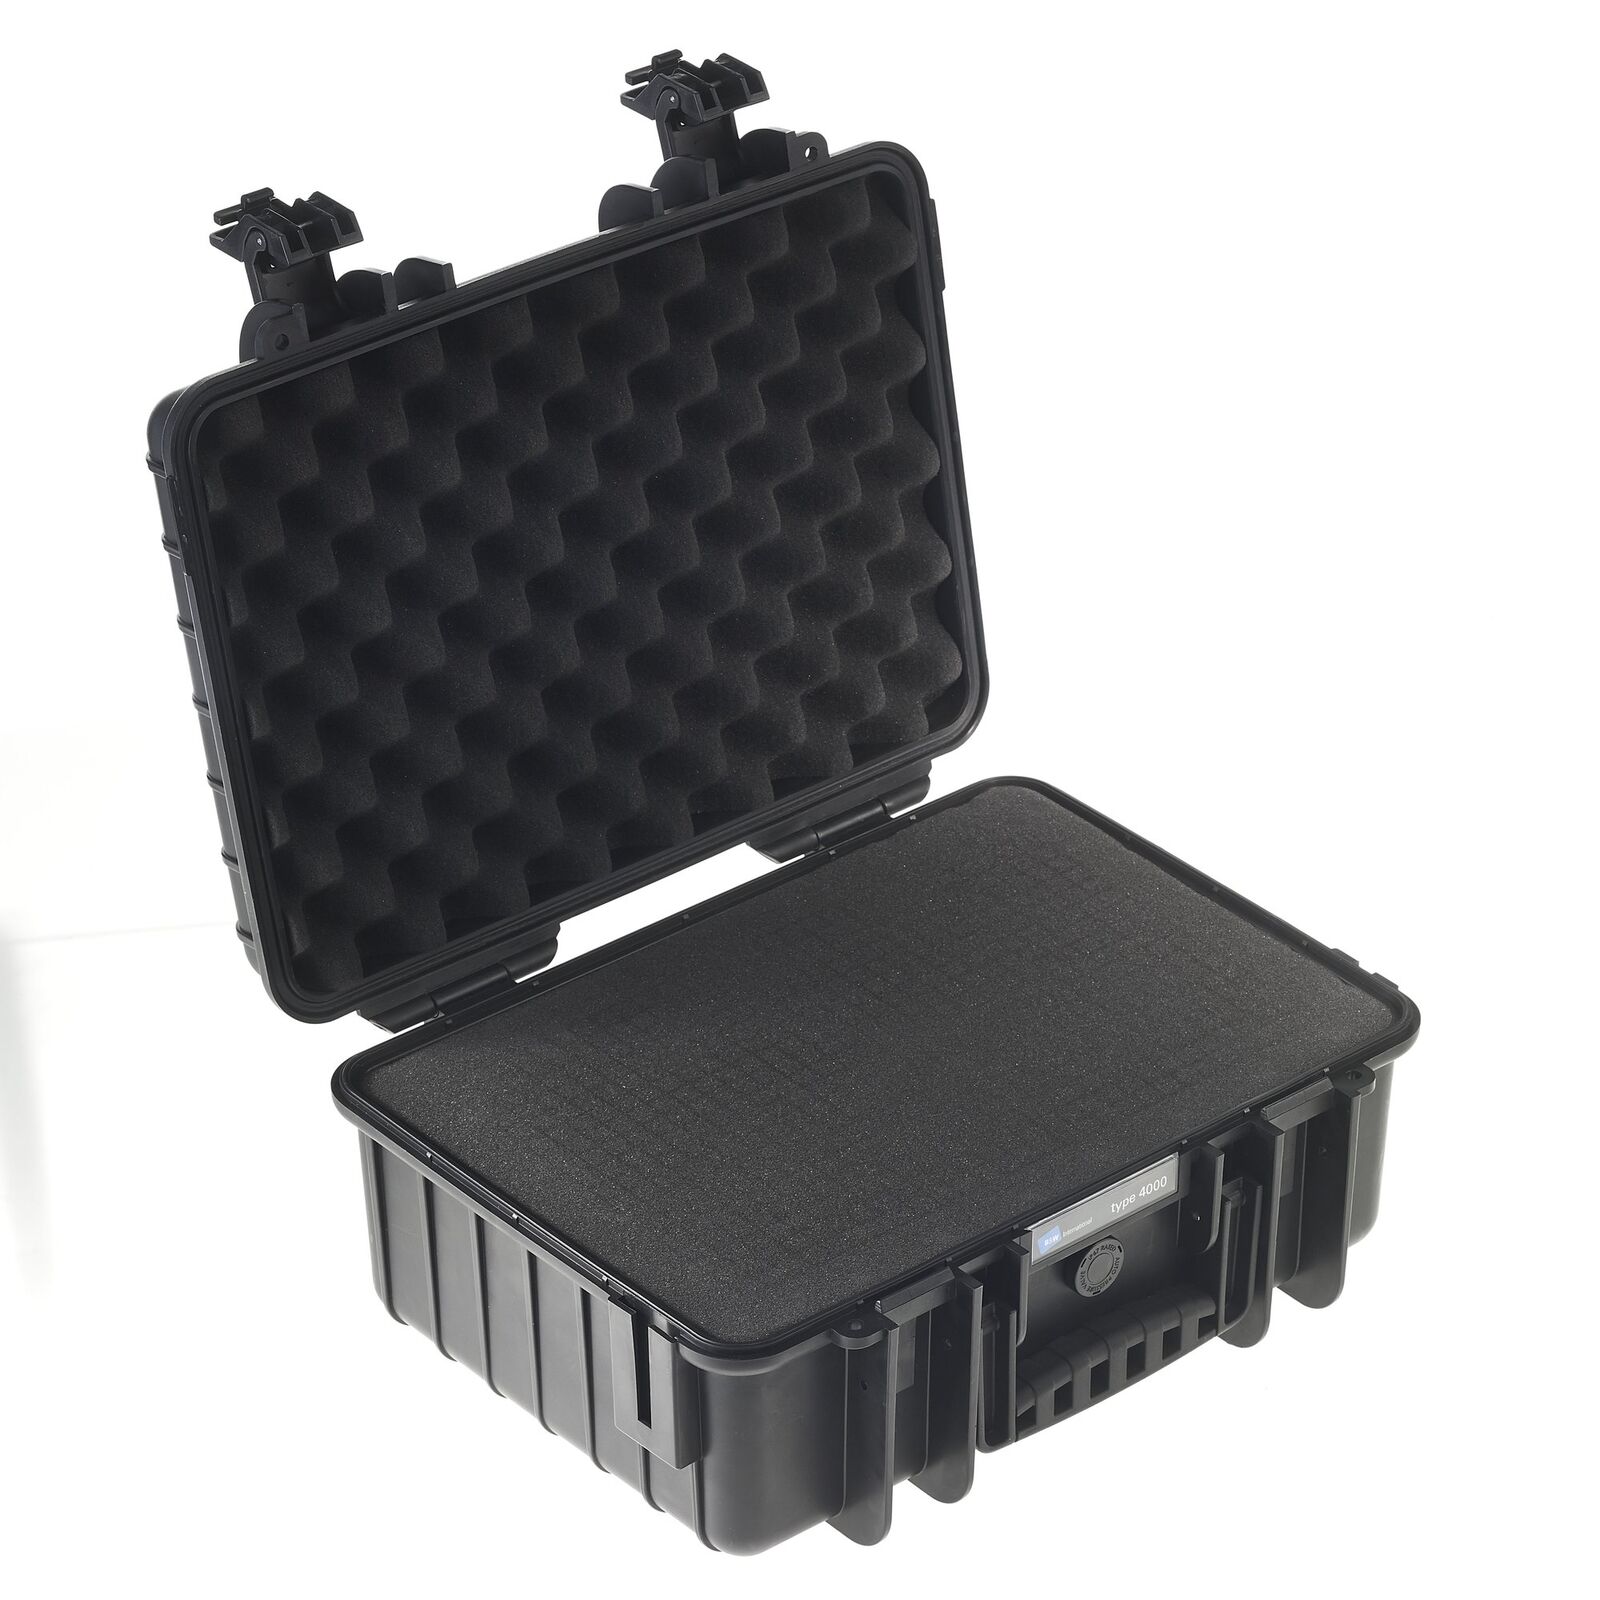 B&W Type 4000 Outdoor Case with SI Foam